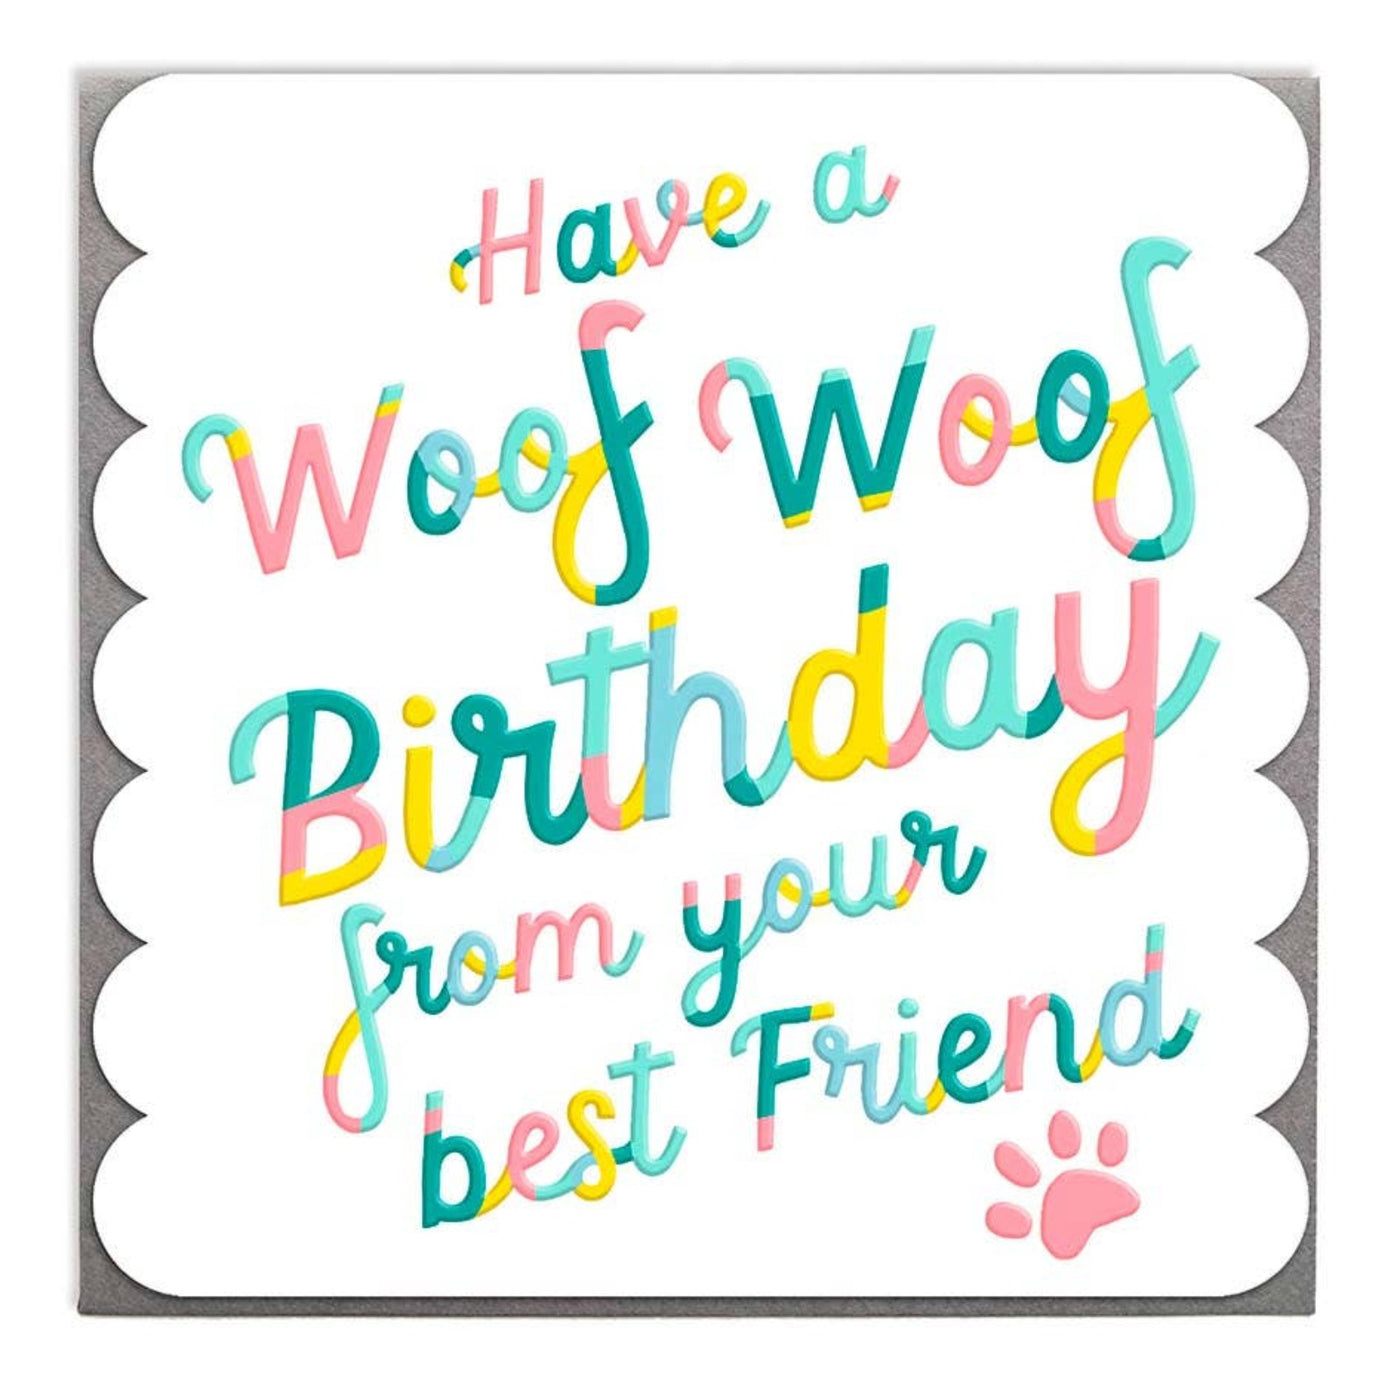 Woof Woof Happy Birthday From The Dog Card